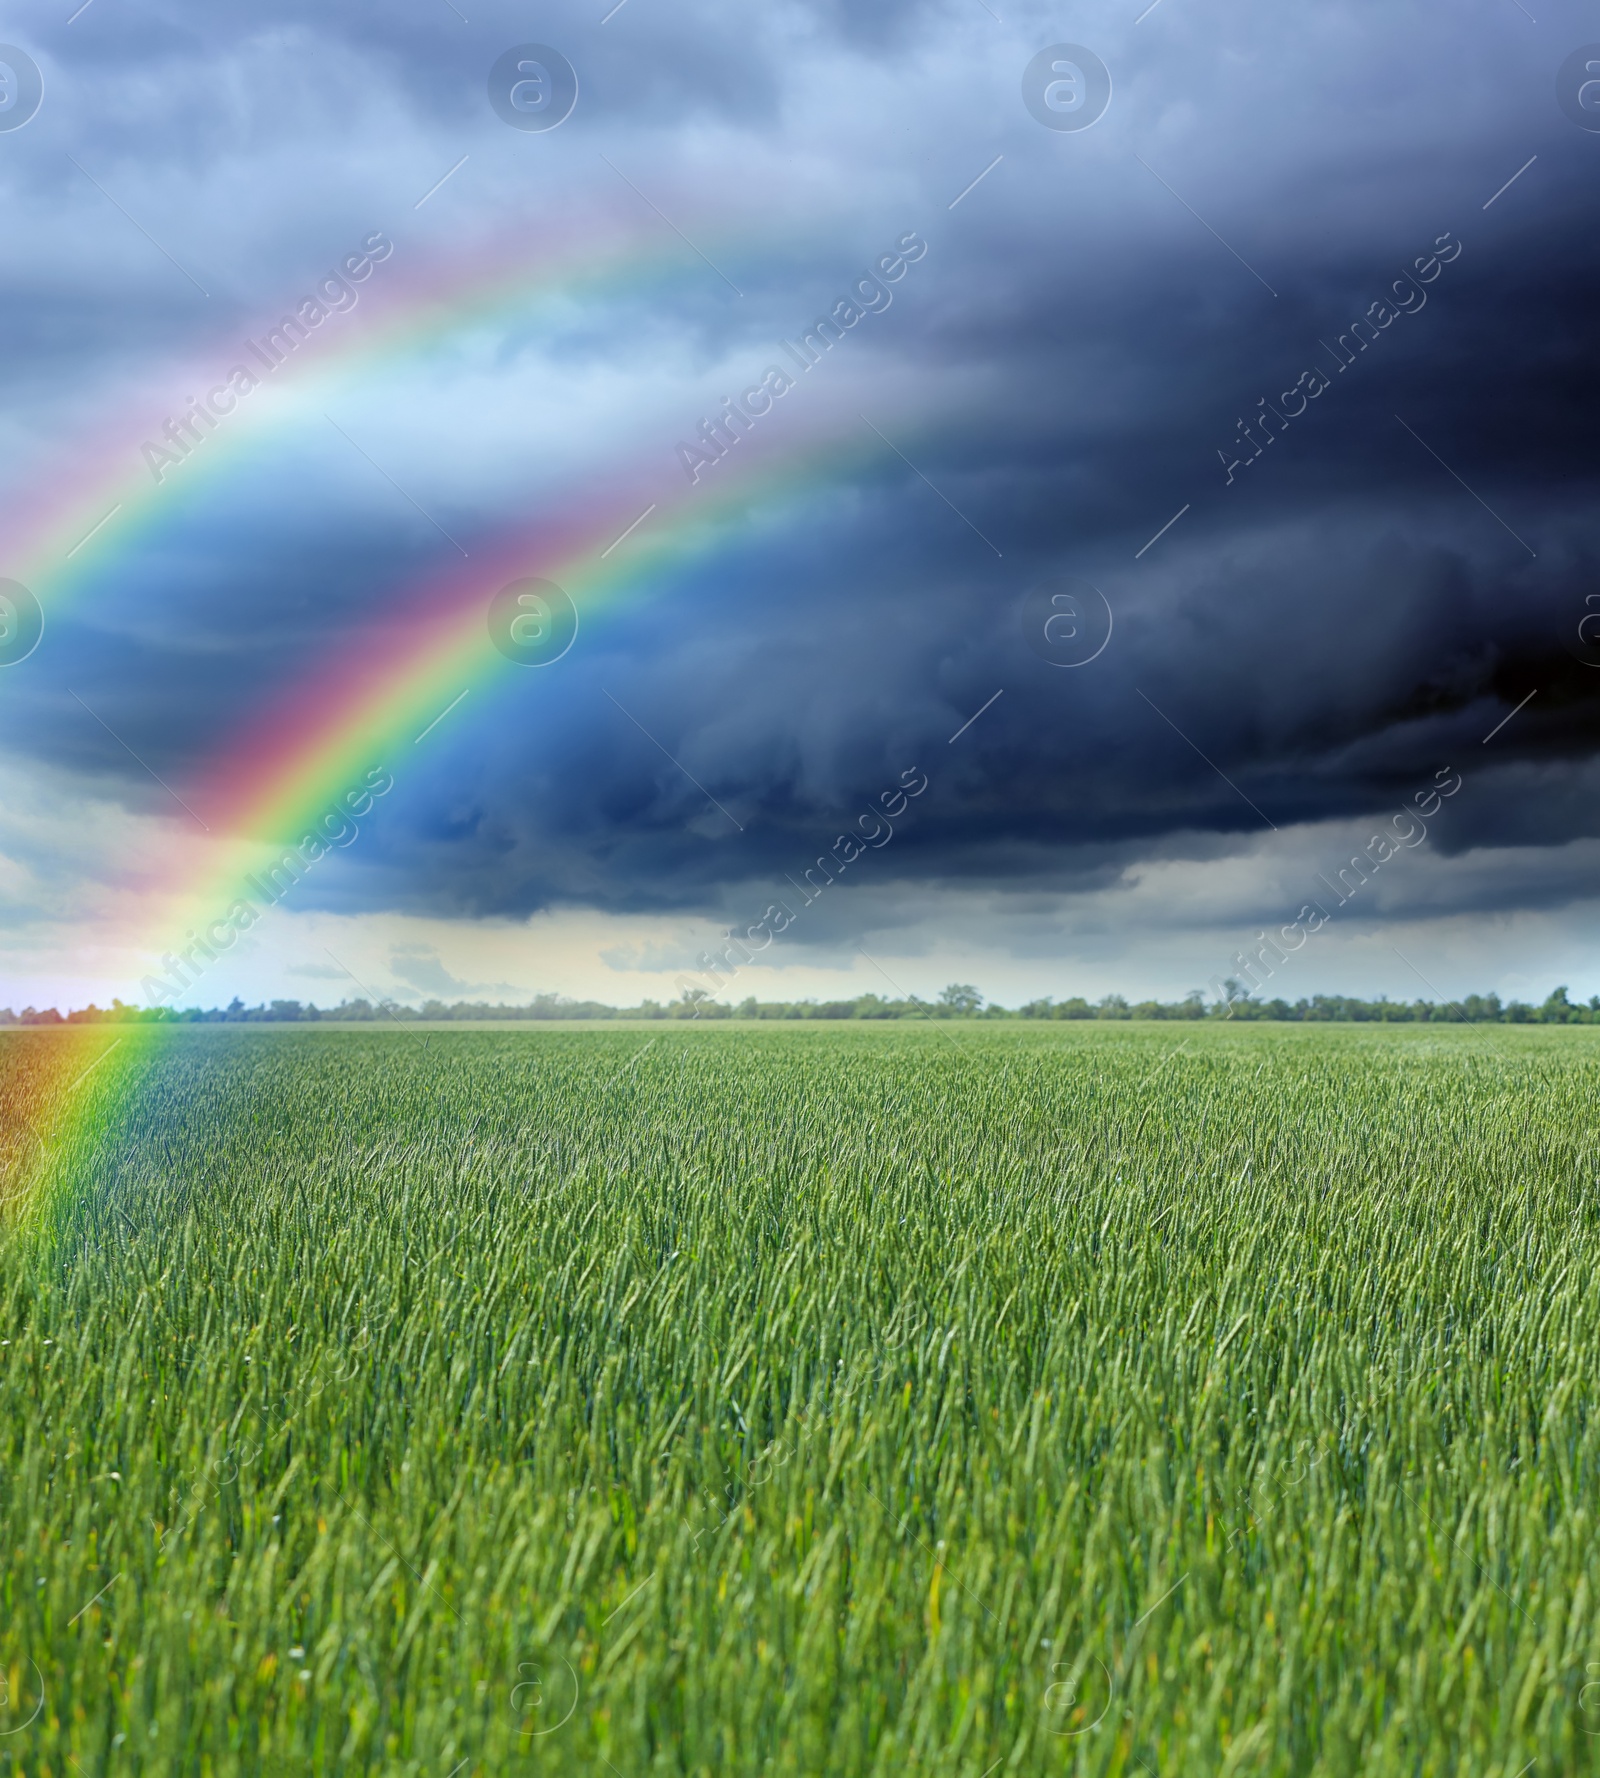 Image of Amazing double rainbow over green wheat field under stormy sky